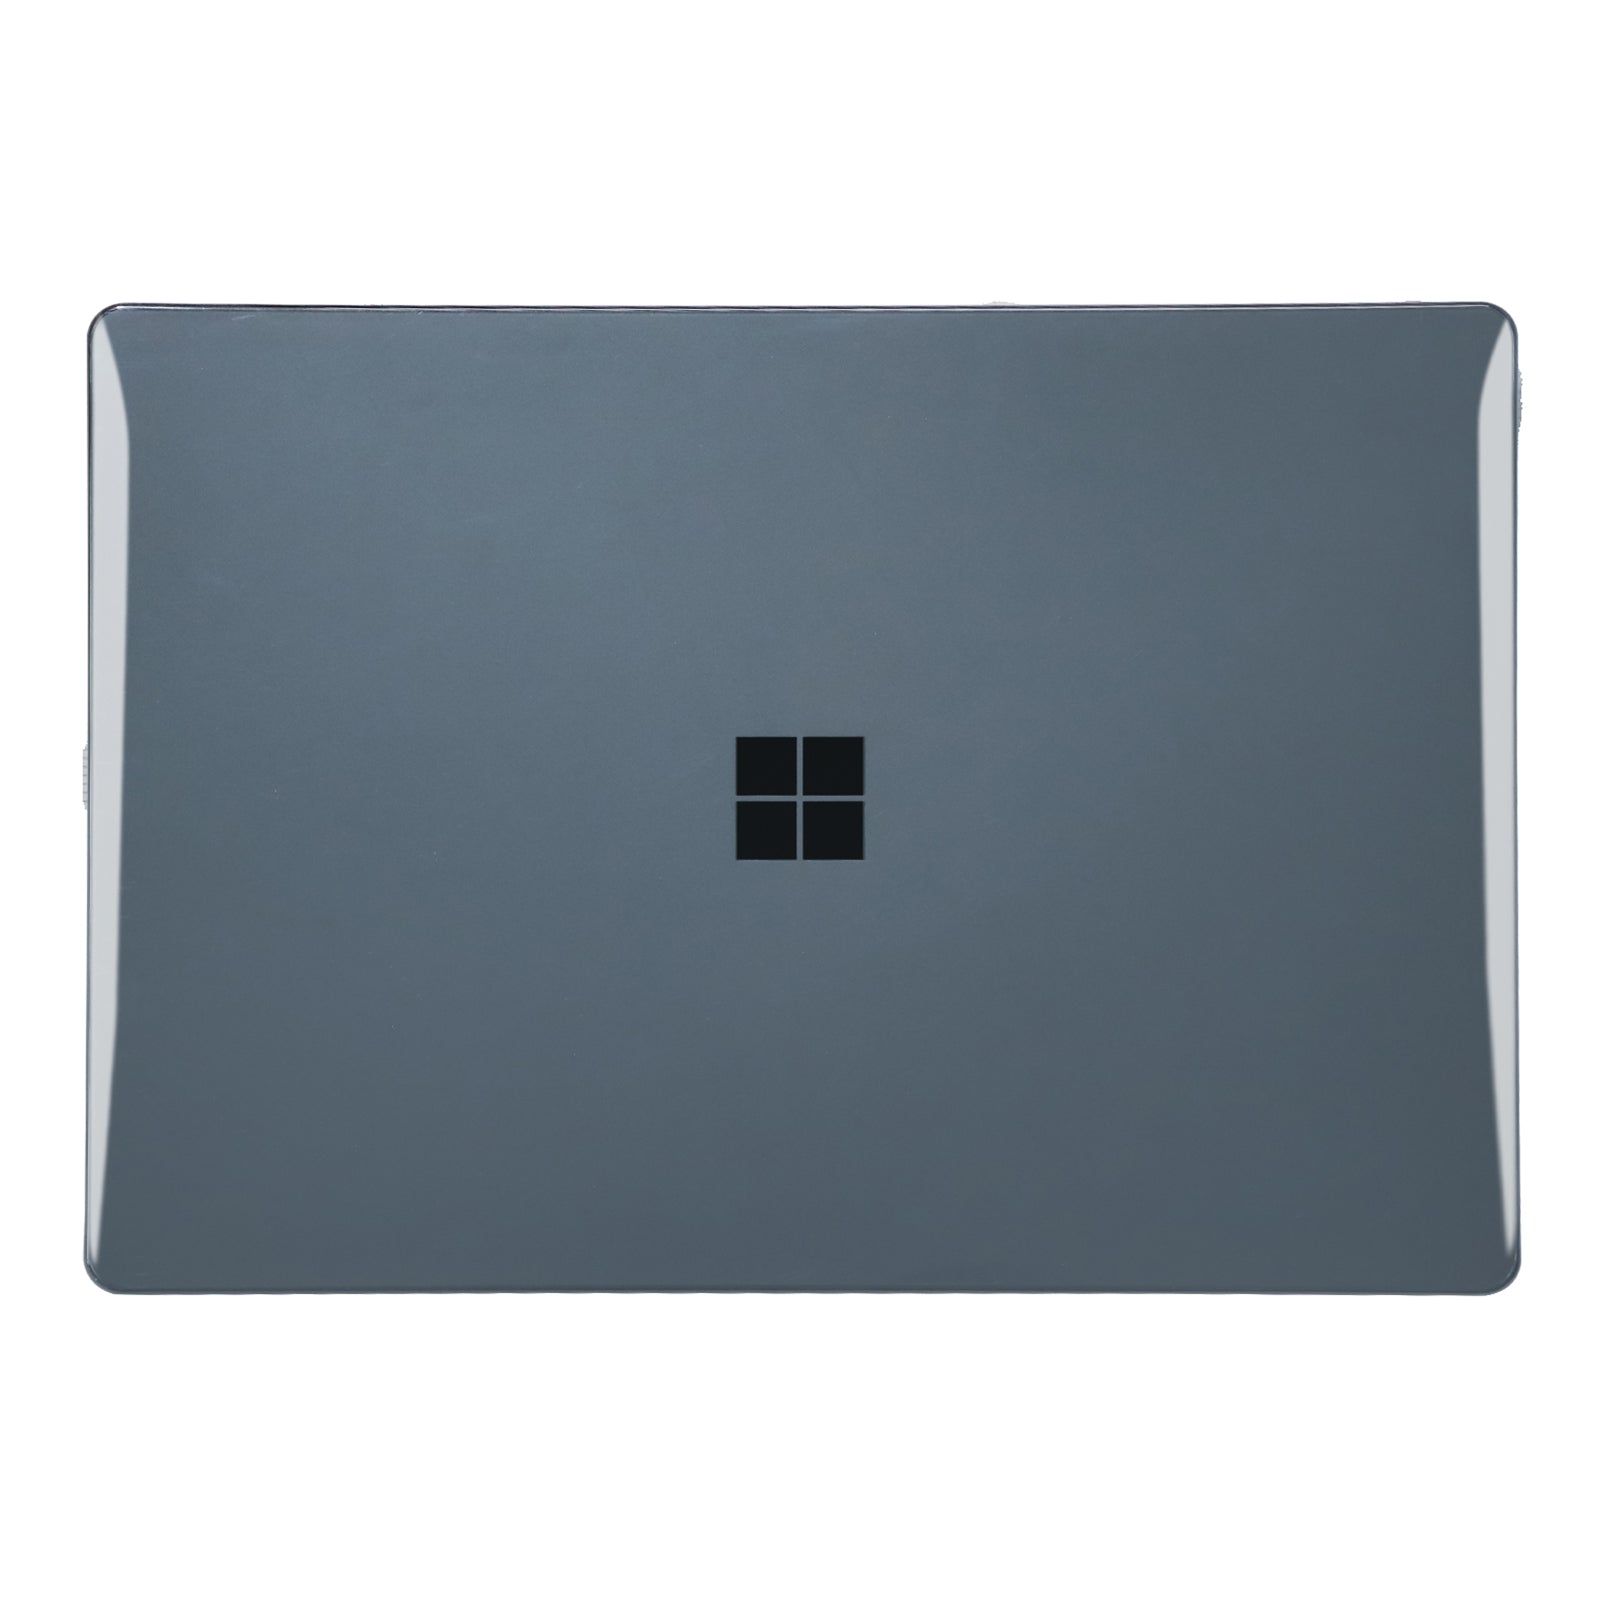 for Microsoft Surface Laptop 3 / 4 / 5 (1868 / 1951) Metal Keyboard Version Hard PC Crystal Protective Cover Shock Resistant Laptop Notebook Case - Black